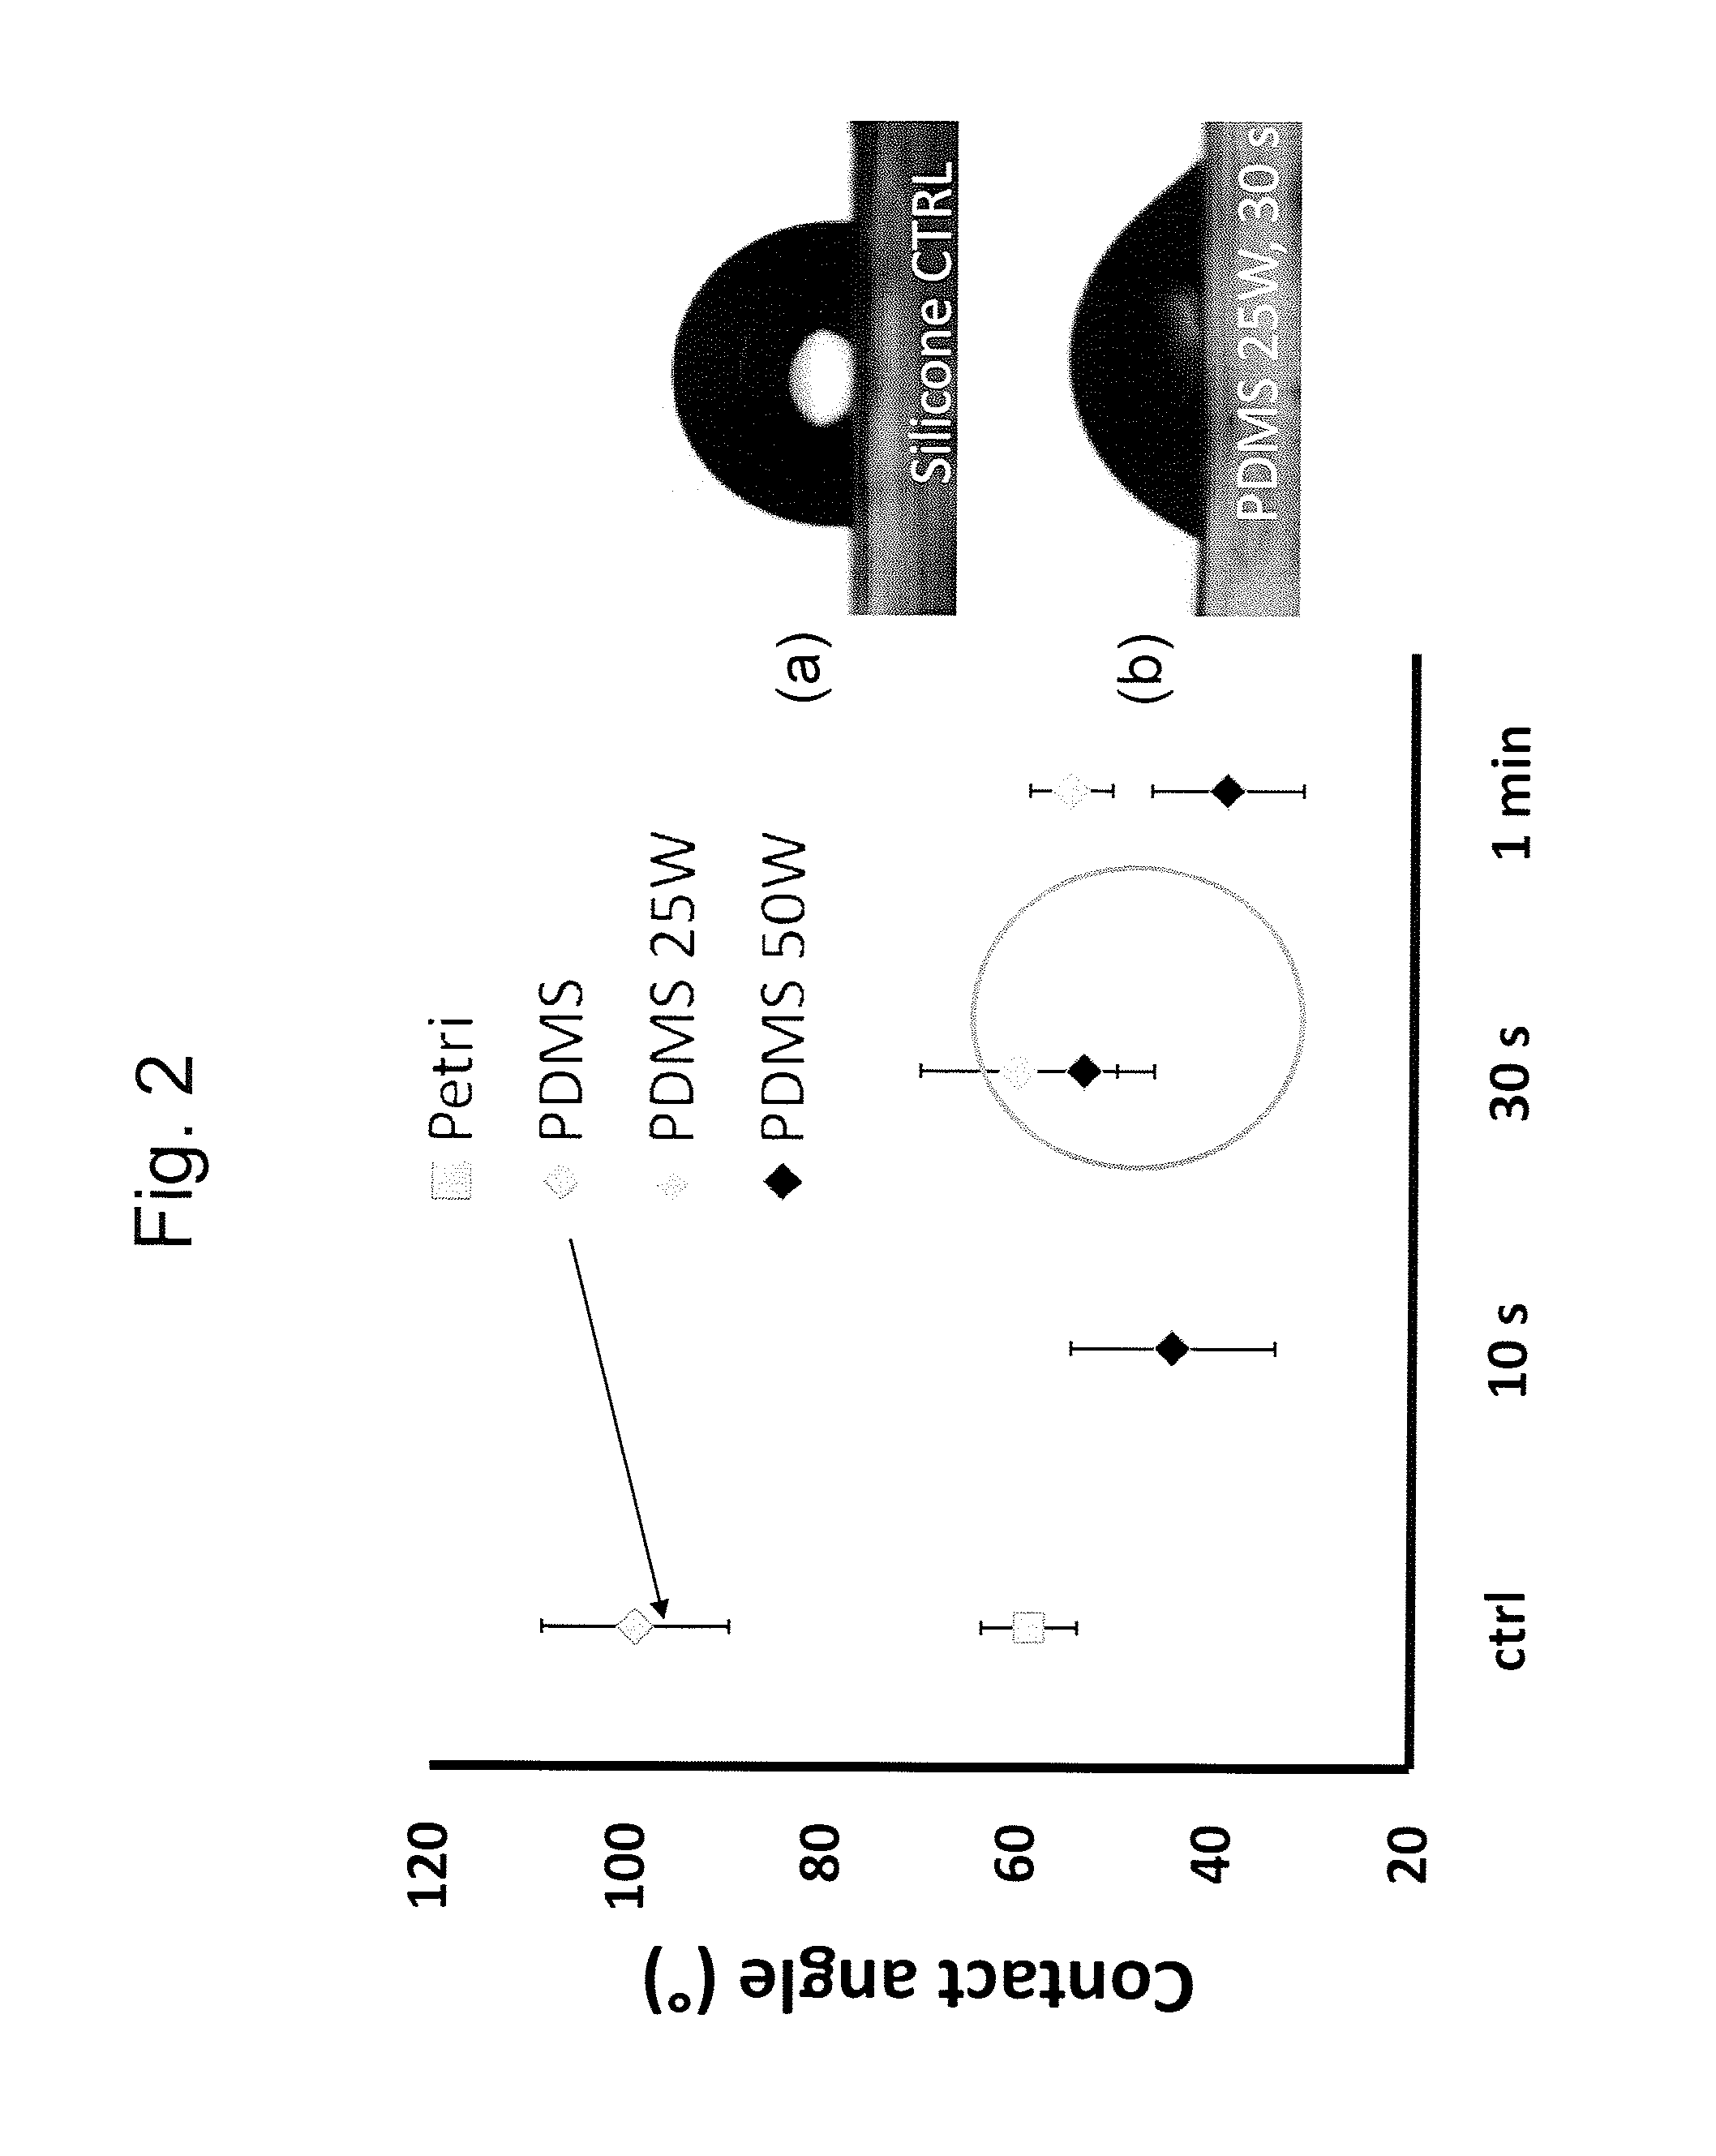 Selective Plasma Activation for Medical Implants and Wound Healing Devices